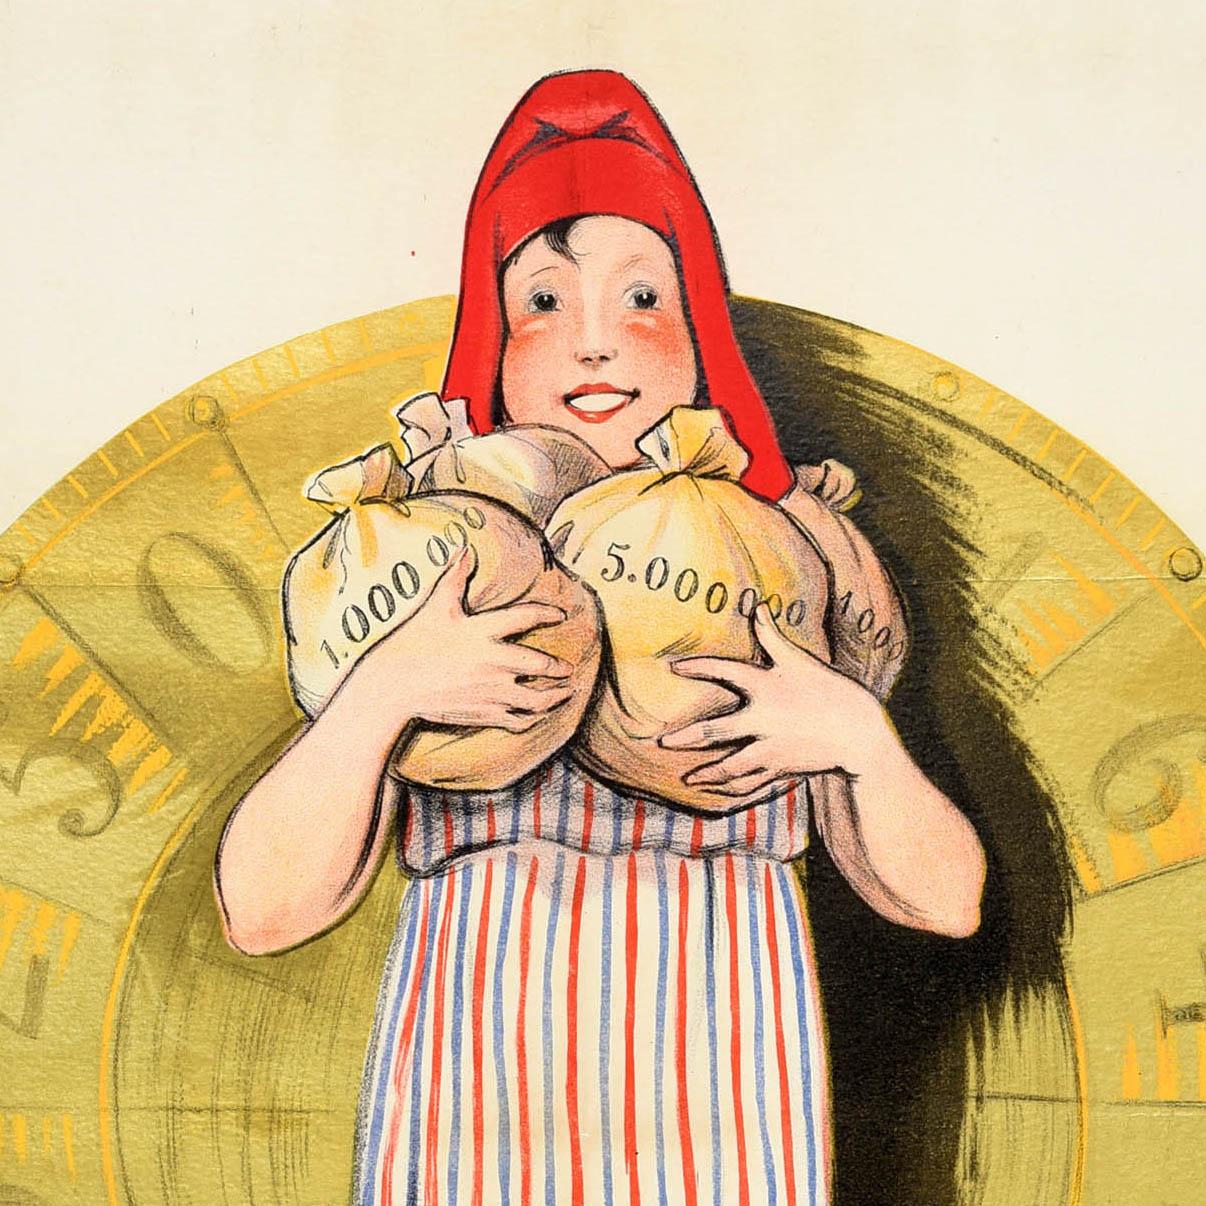 Original vintage advertising poster for the French National Lottery / Loterie Nationale featuring a smiling person wearing a stripy tunic with a red cap, holding some heavy money bags full of coins marked 1,000,000 and 5,000,000 in front of a